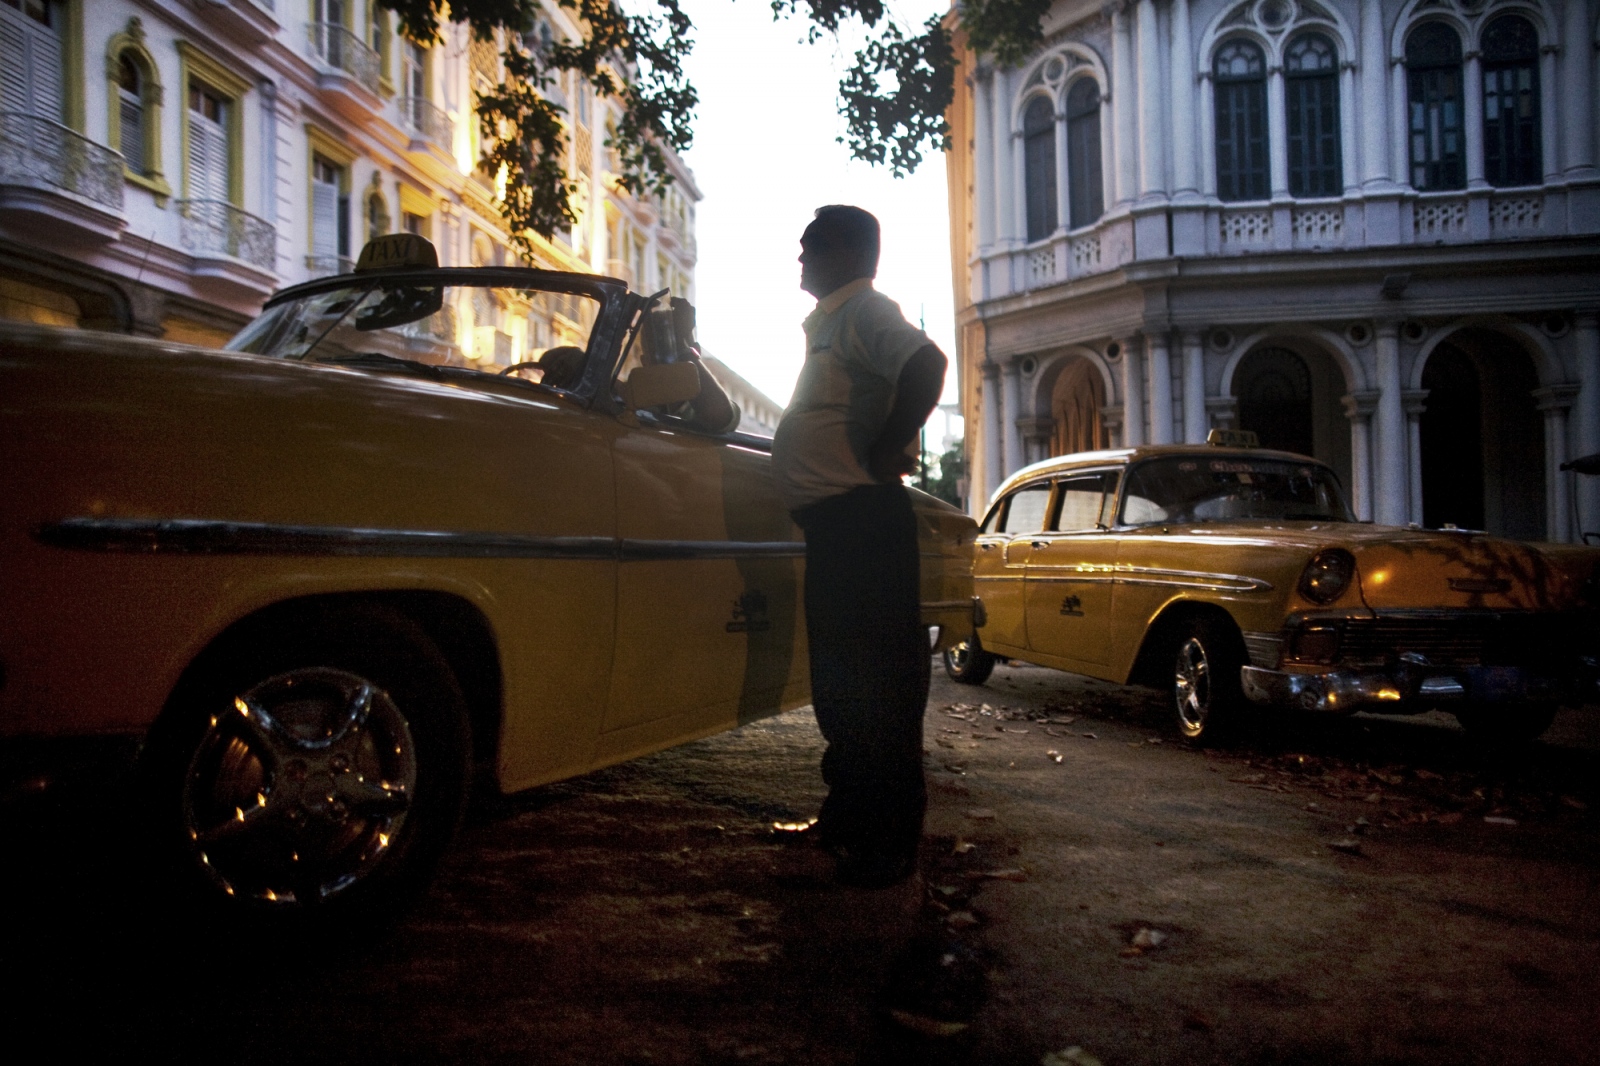 Â¡Cuba Libre! - State employed taxi drivers wait for fares in Havana...